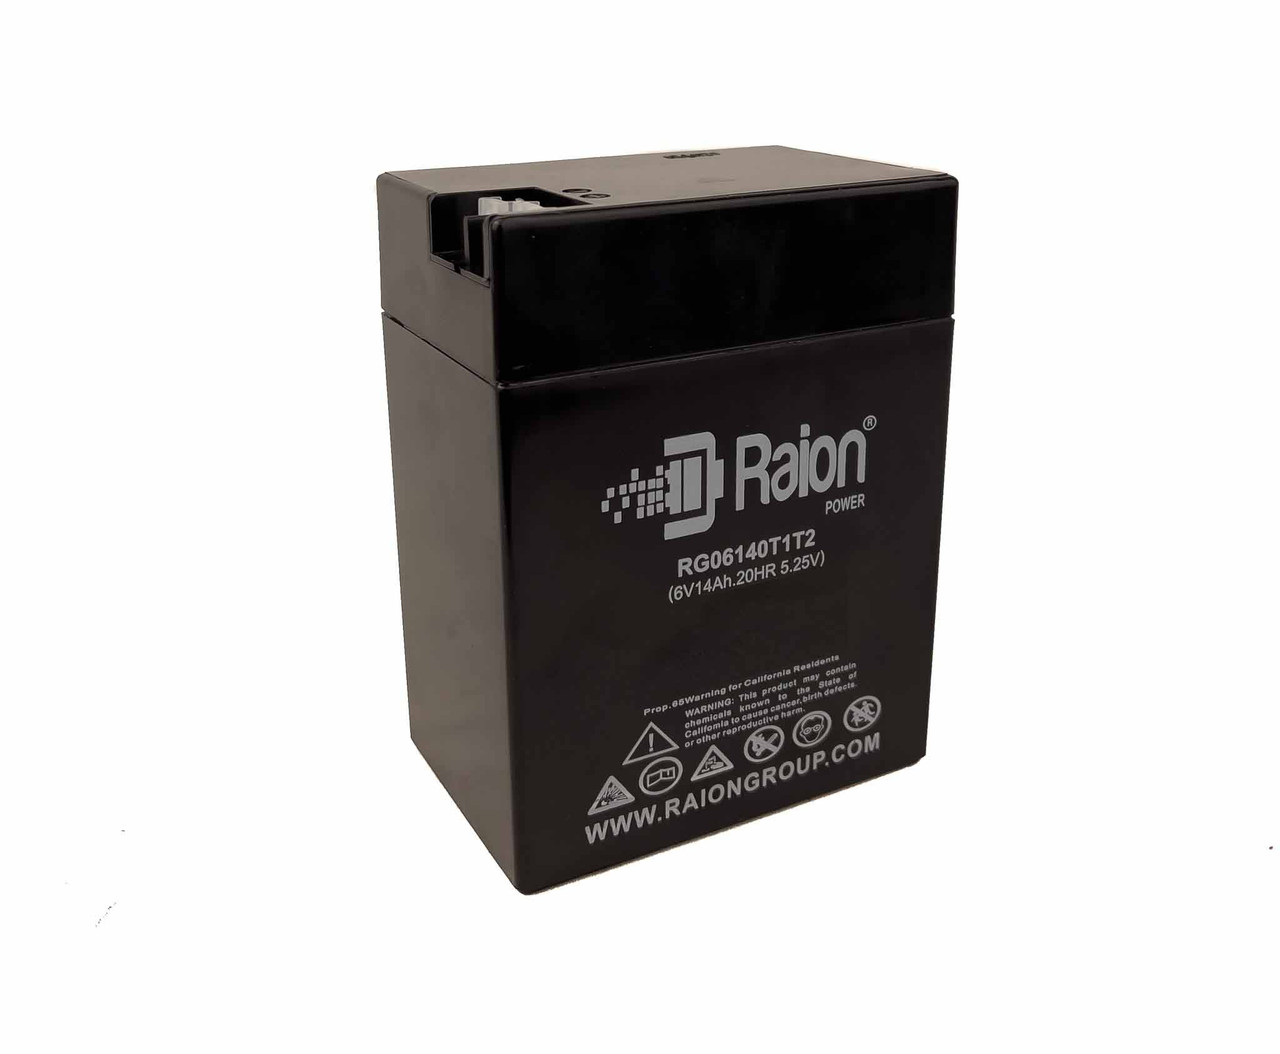 Raion Power RG06140T1T2 Non-Spillable Replacement Battery for Lil Suzuki (Hong Kong/Singapore) 73565-9563